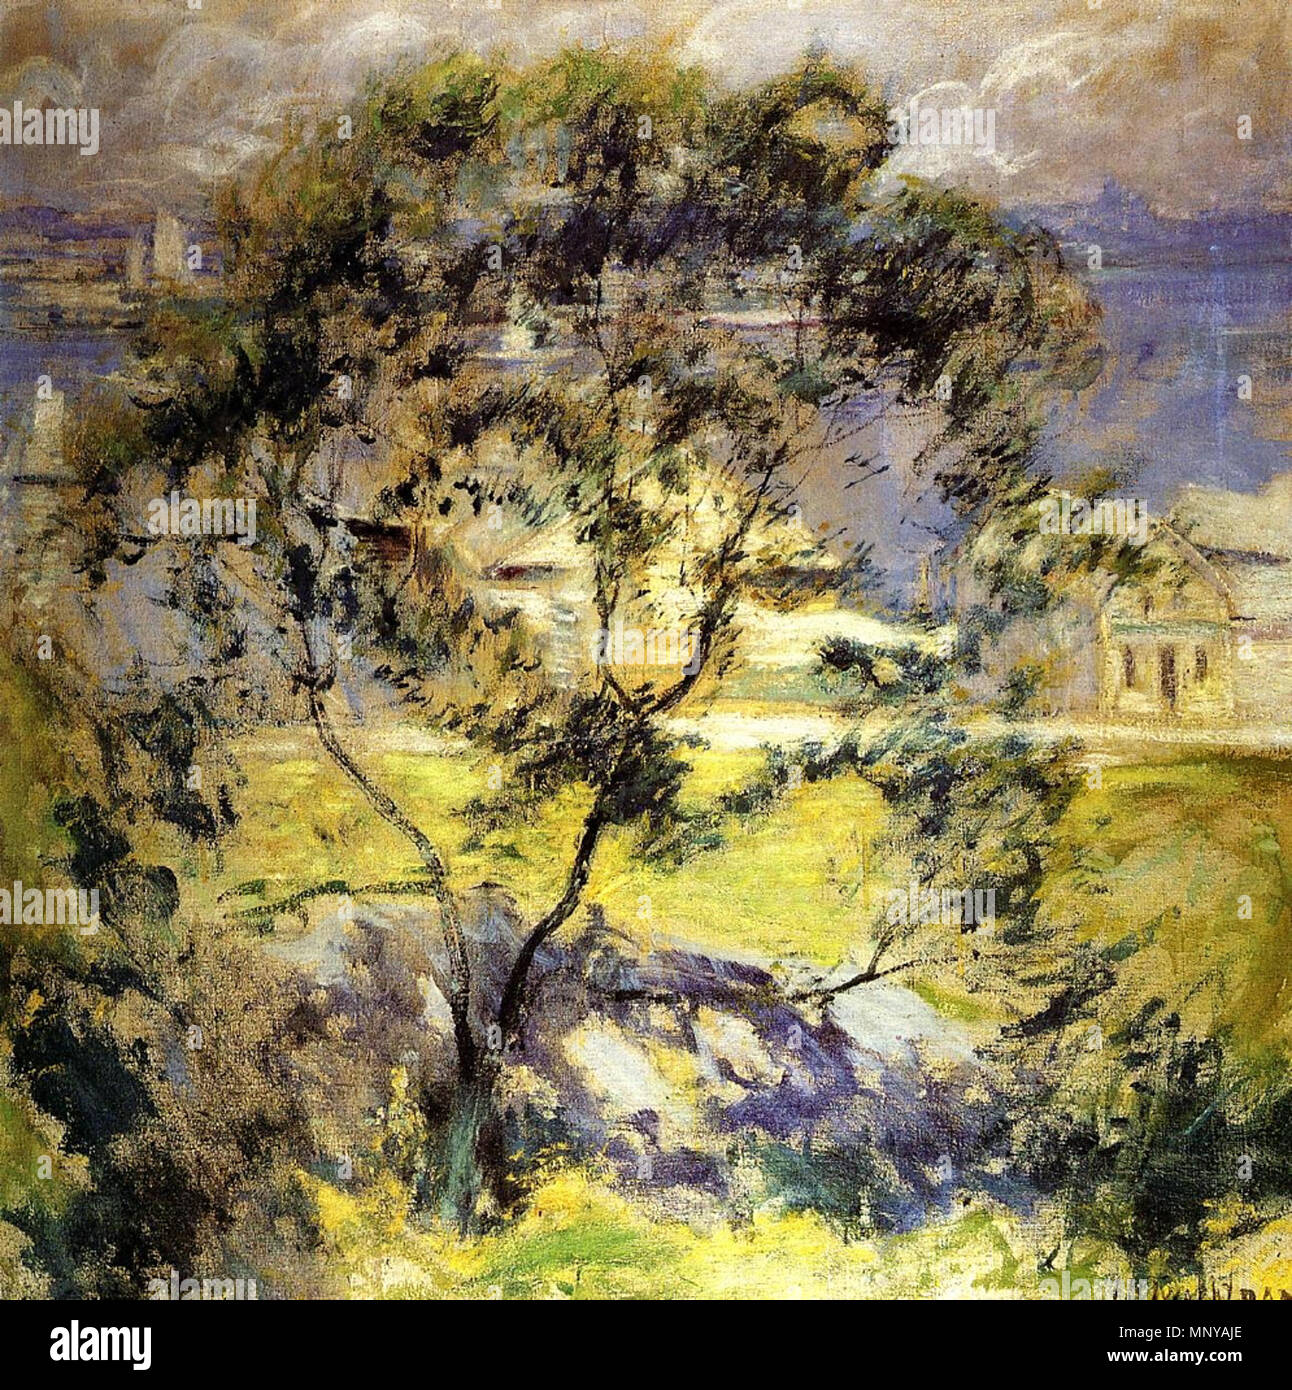 .  English: 'Wild Cherry Tree,' oil on canvas, by the American painter John Twachtman. Courtesy of the Albright-Knox Art Gallery. . circa 1901.    John Henry Twachtman  (1853–1902)     Alternative names Twachtman, John H.  Description American painter  Date of birth/death 4 August 1853 8 August 1902  Location of birth/death Cincinnati Gloucester  Work location United States, France  Authority control  : Q1342683 VIAF: 23008140 ISNI: 0000 0000 6680 976X ULAN: 500006514 LCCN: n79061318 WGA: TWACHTMAN, John Henry WorldCat 1258 Wild Cherry Tree John Twachtman c.1901 Stock Photo